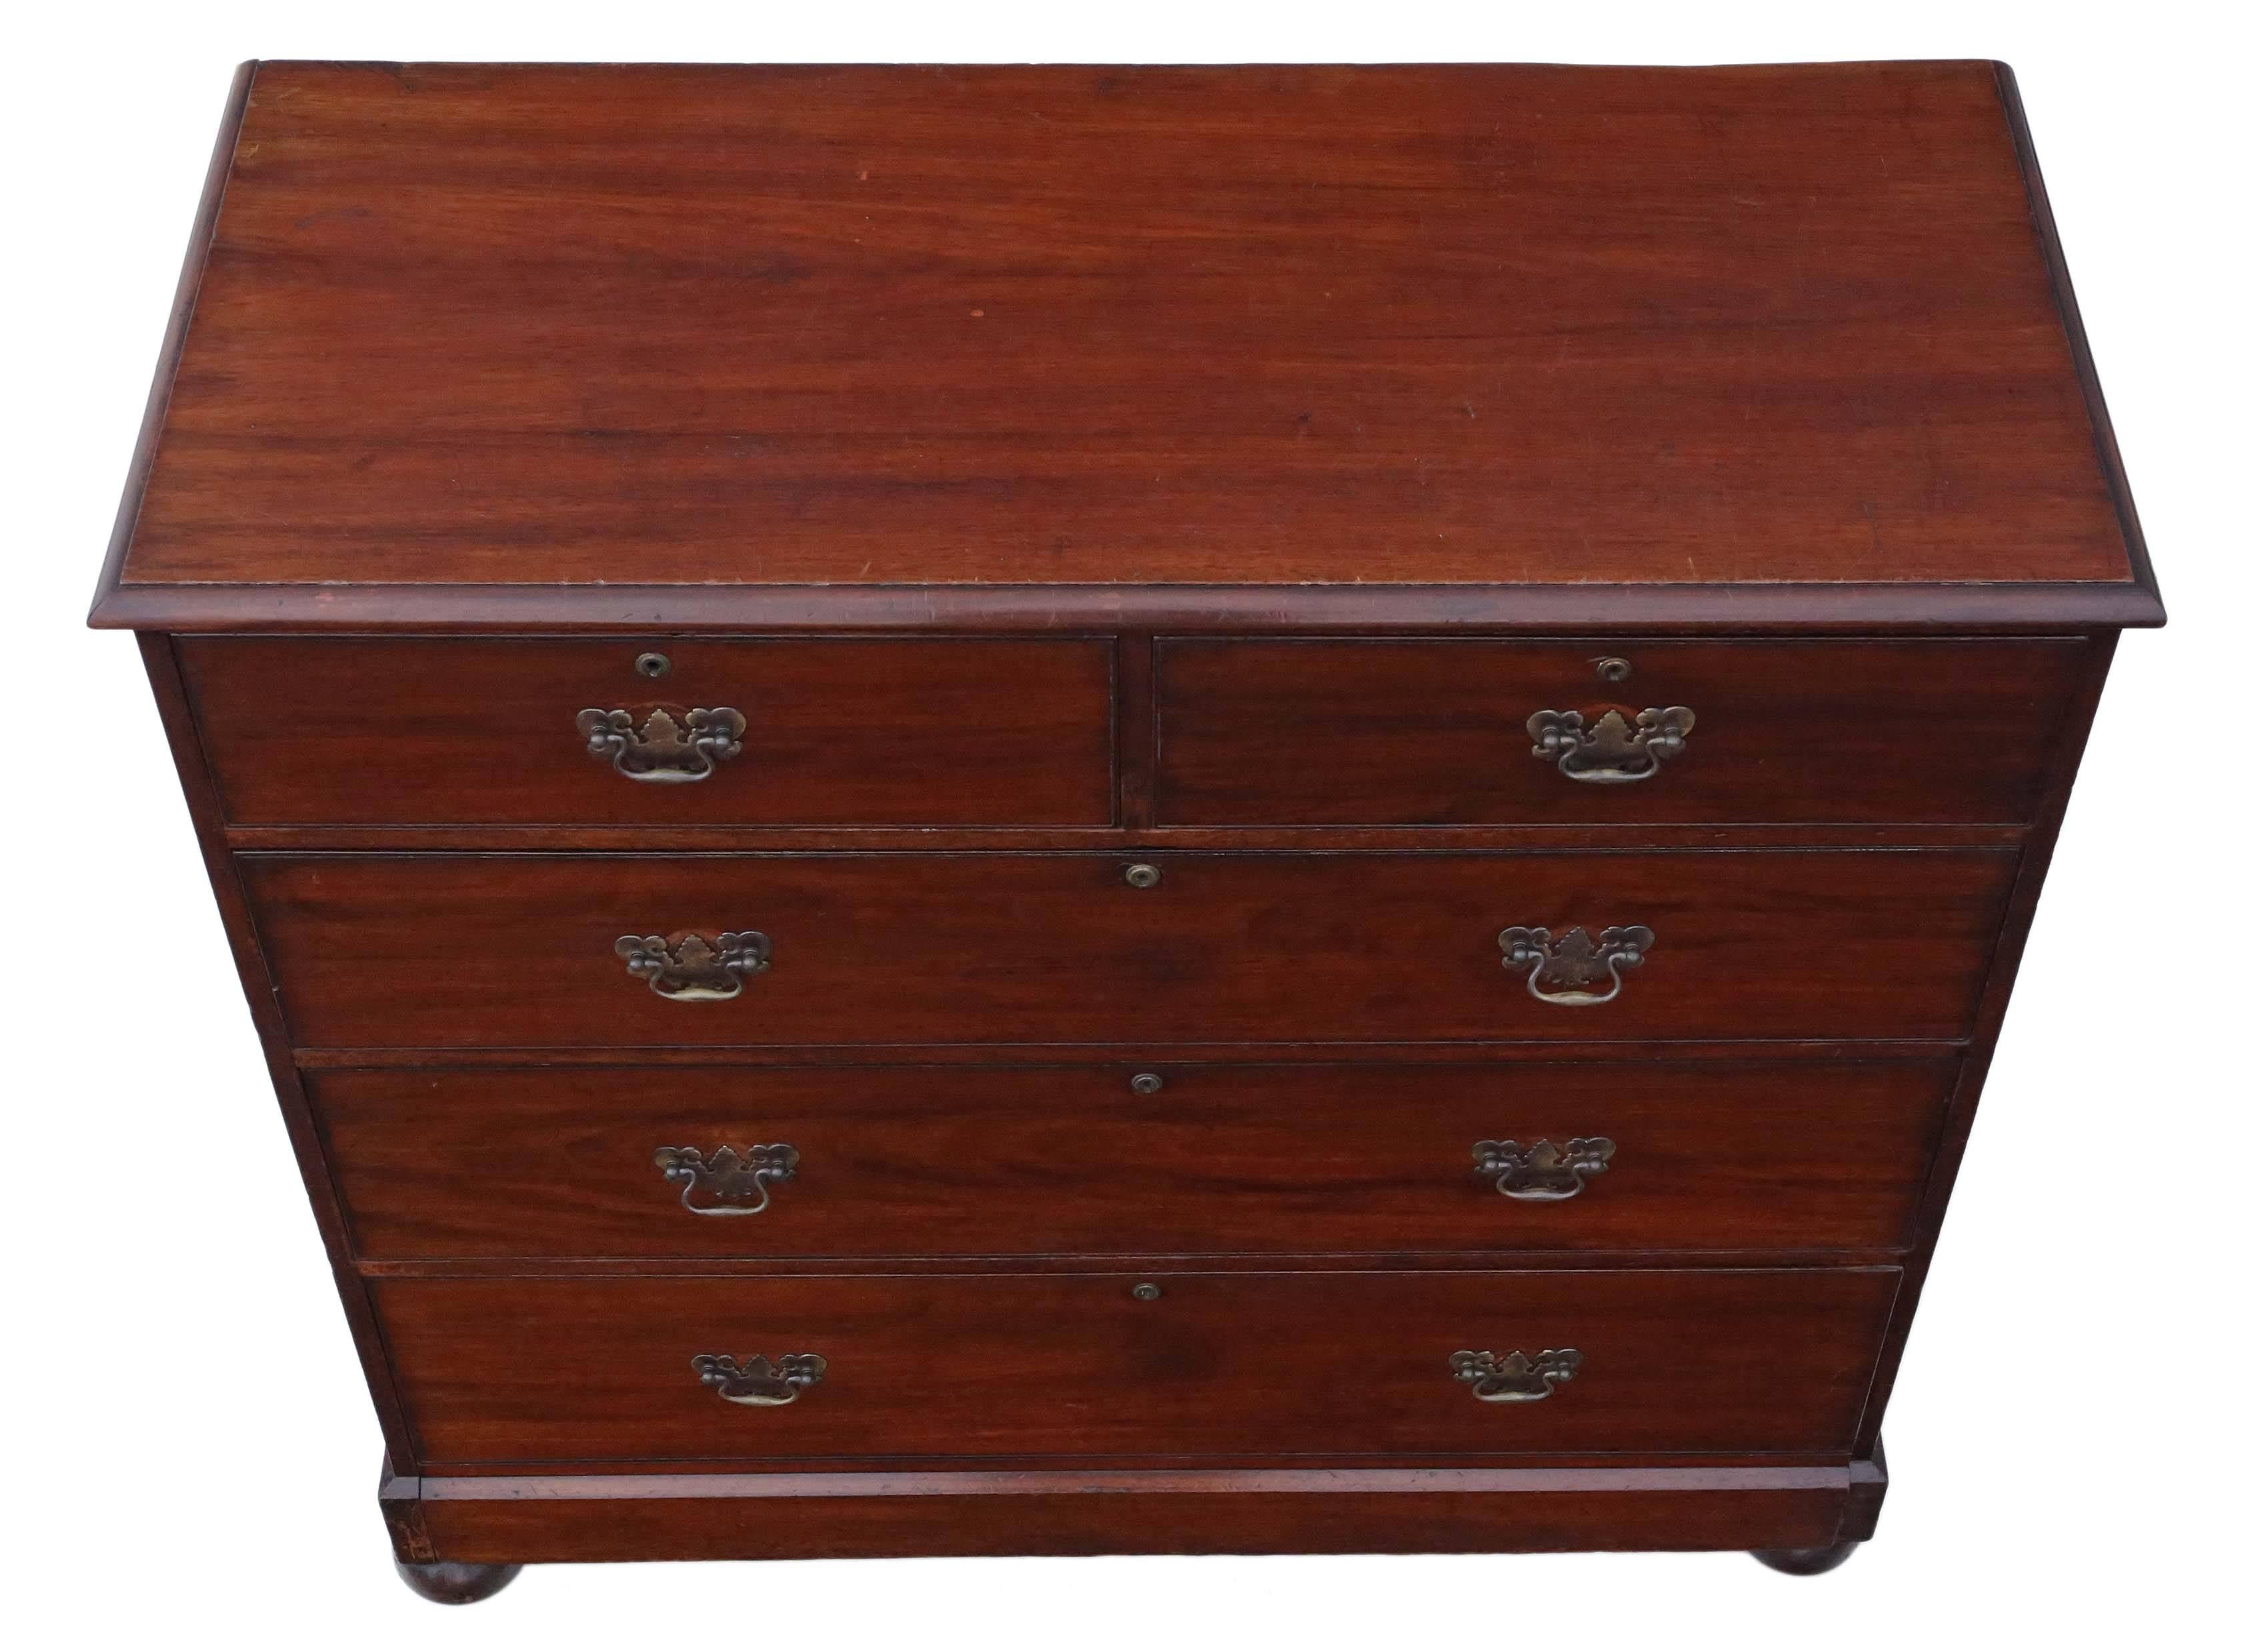 Antique large quality Victorian 19th century mahogany chest of drawers.
A heavy quality chest, with no loose joints and the ash lined drawers slide freely.

No woodworm.

Full of age charm and character would look great in the right location.